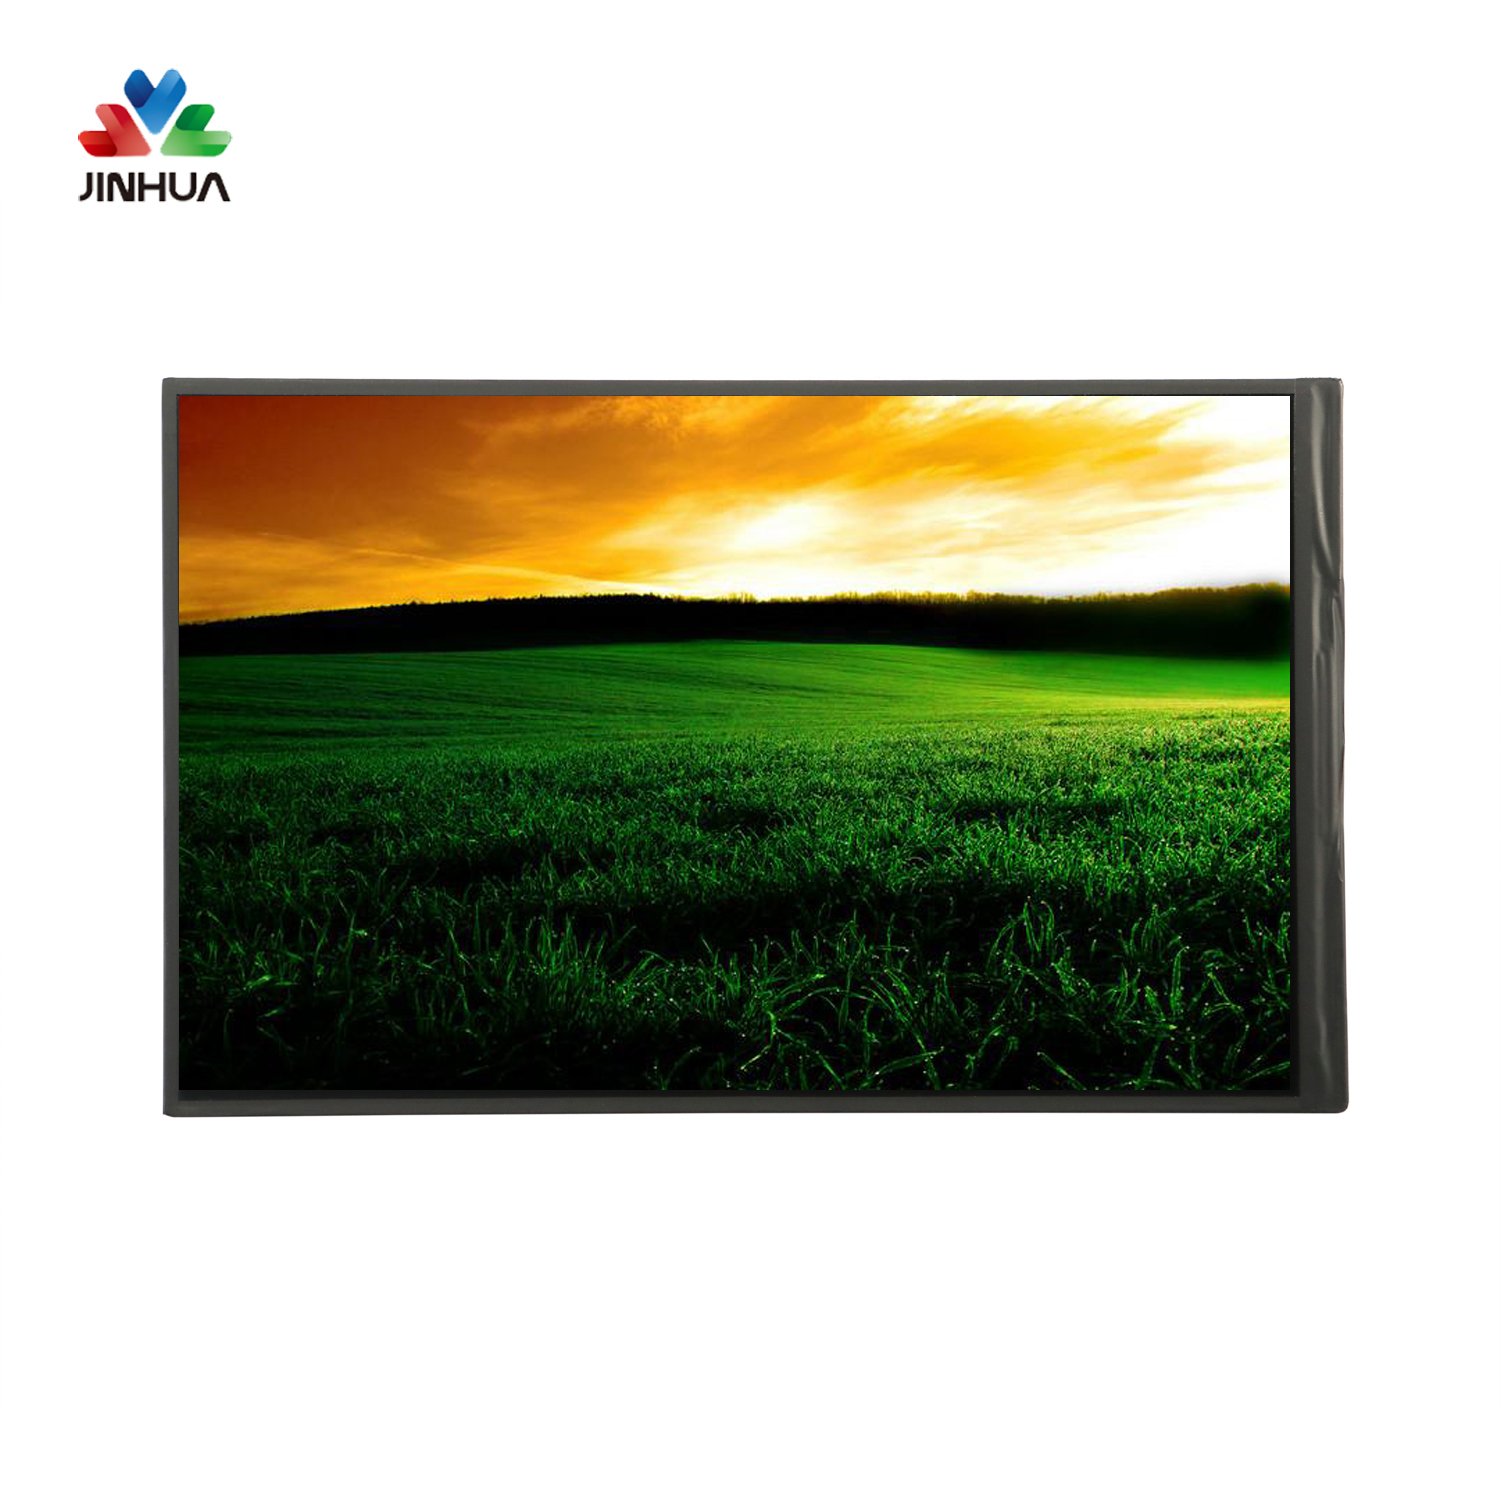 8" 800x600 Resolution Capacitive Resistive Touch IPS TFT LCD